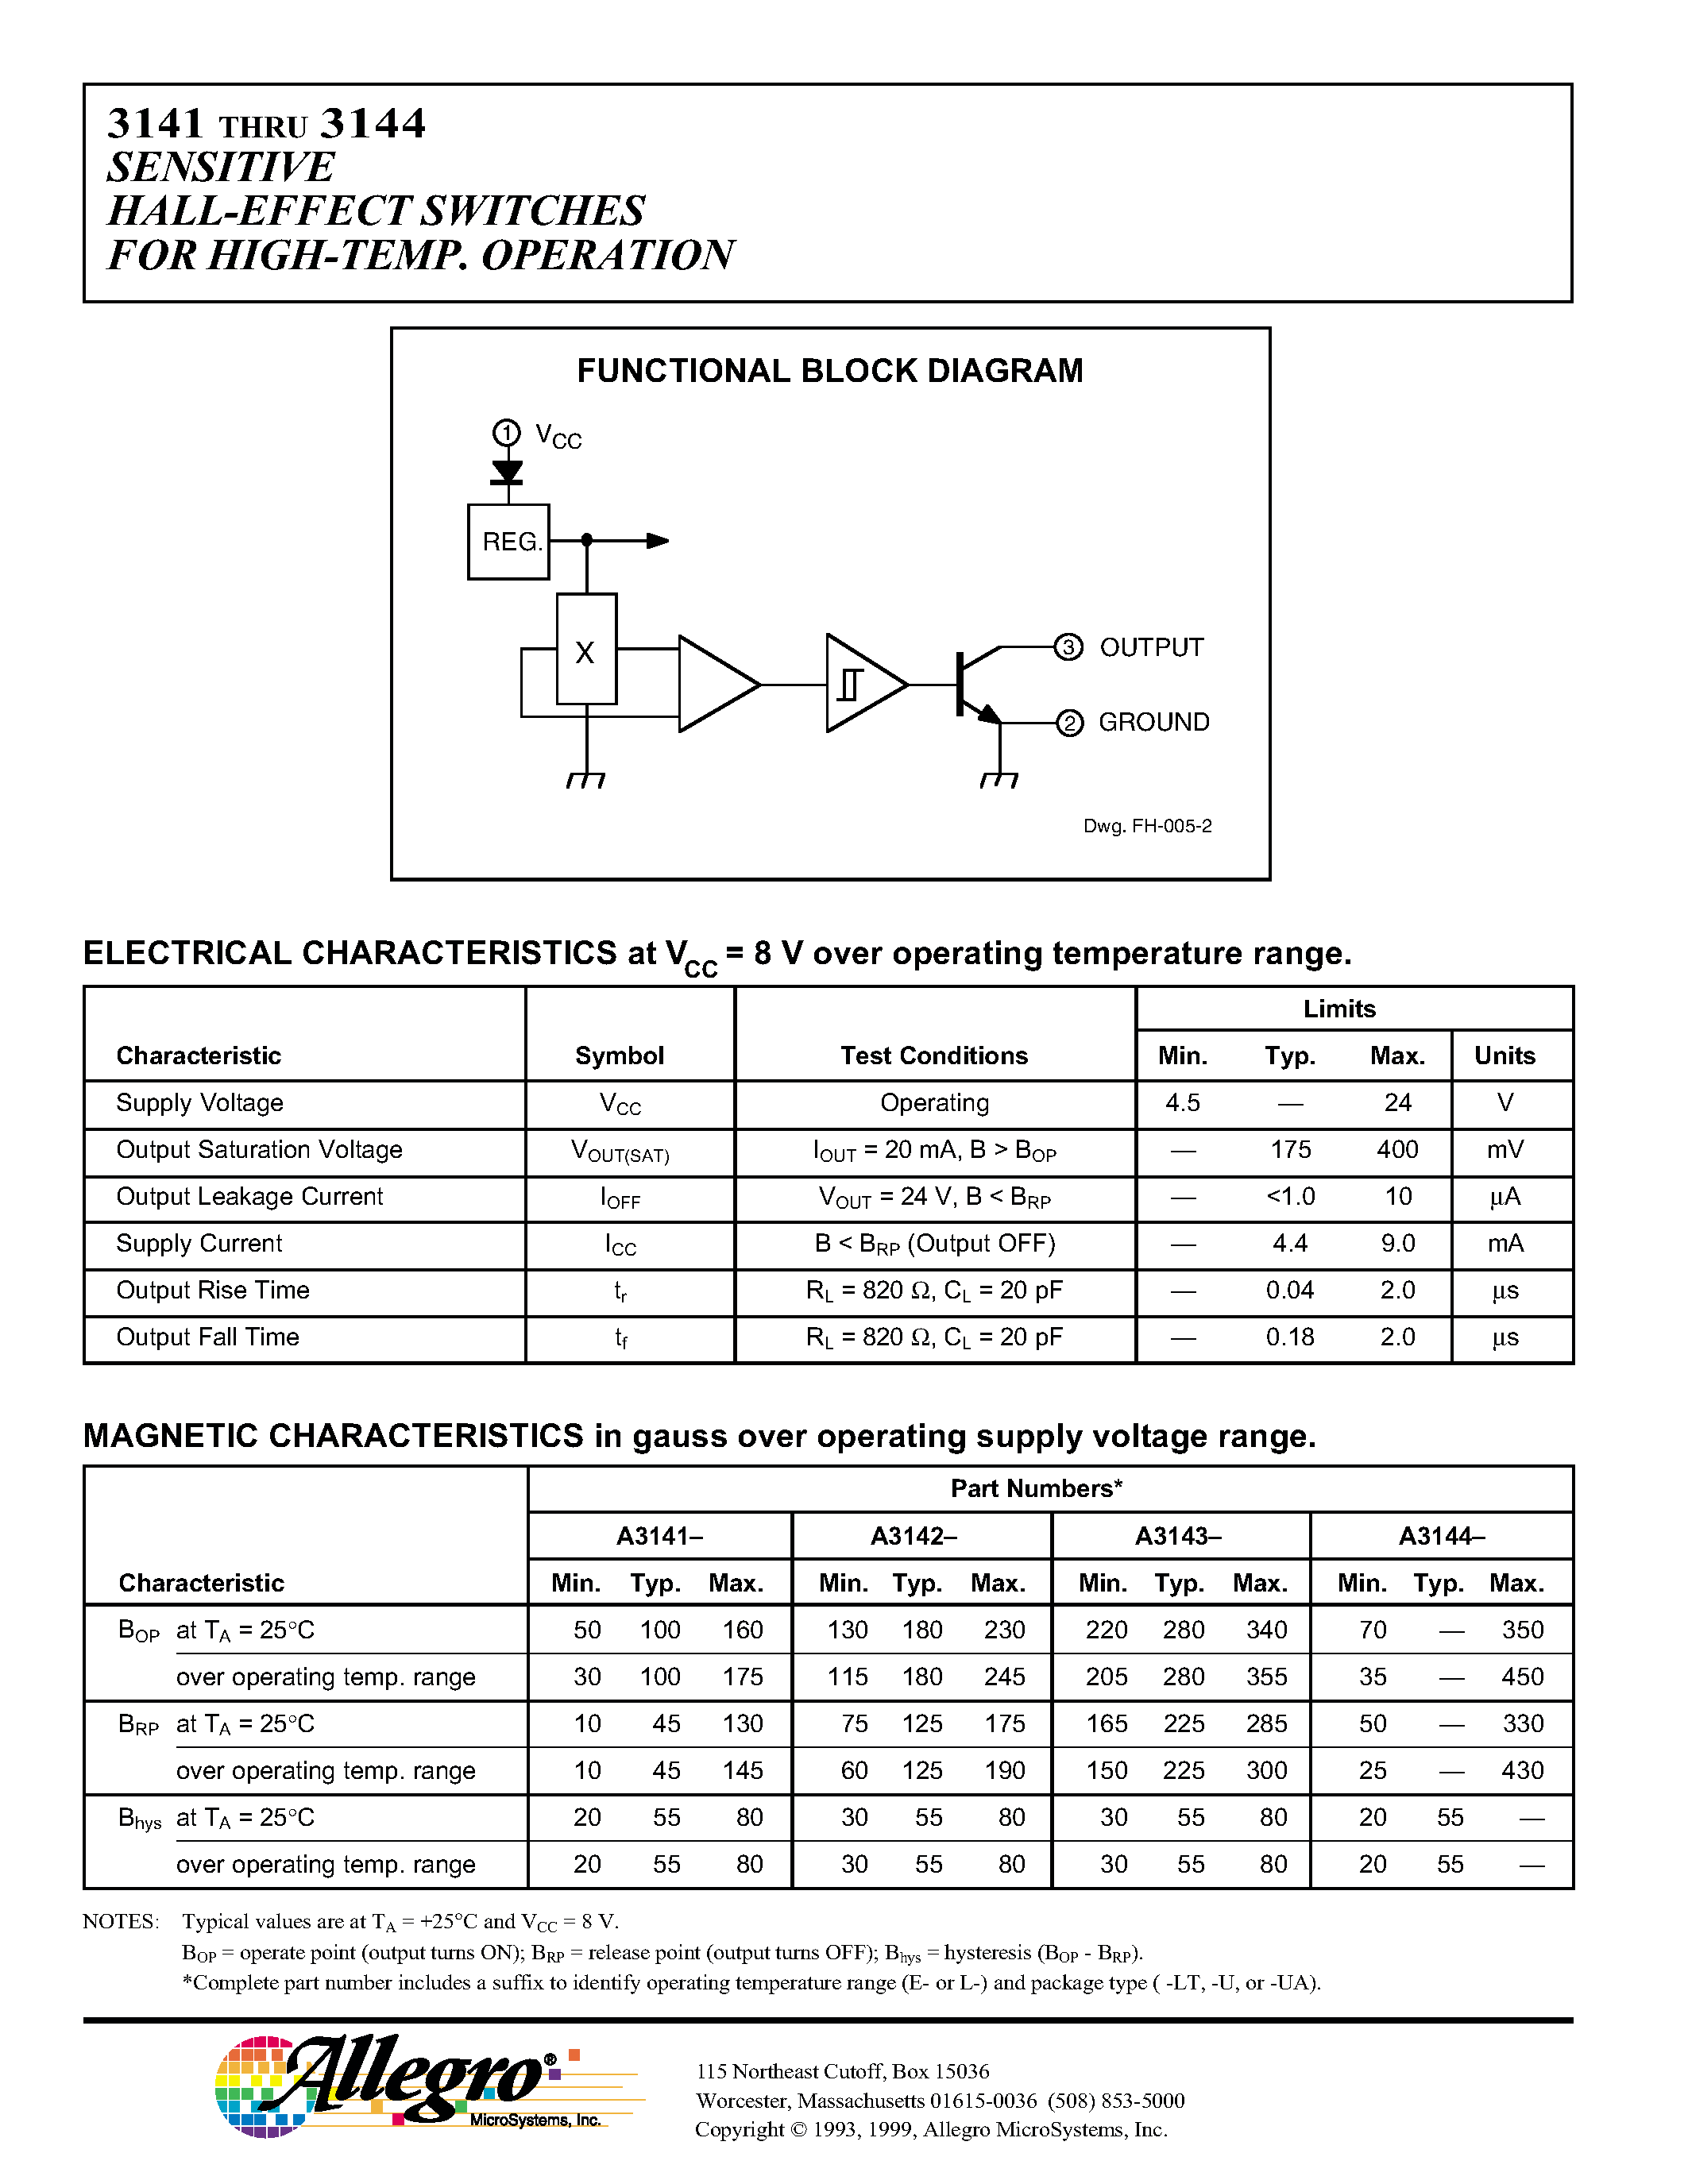 Даташит A3141-U-SENSITIVE HALL-EFFECT SWITCHES FOR HIGH-TEMPERATURE OPERATION страница 2